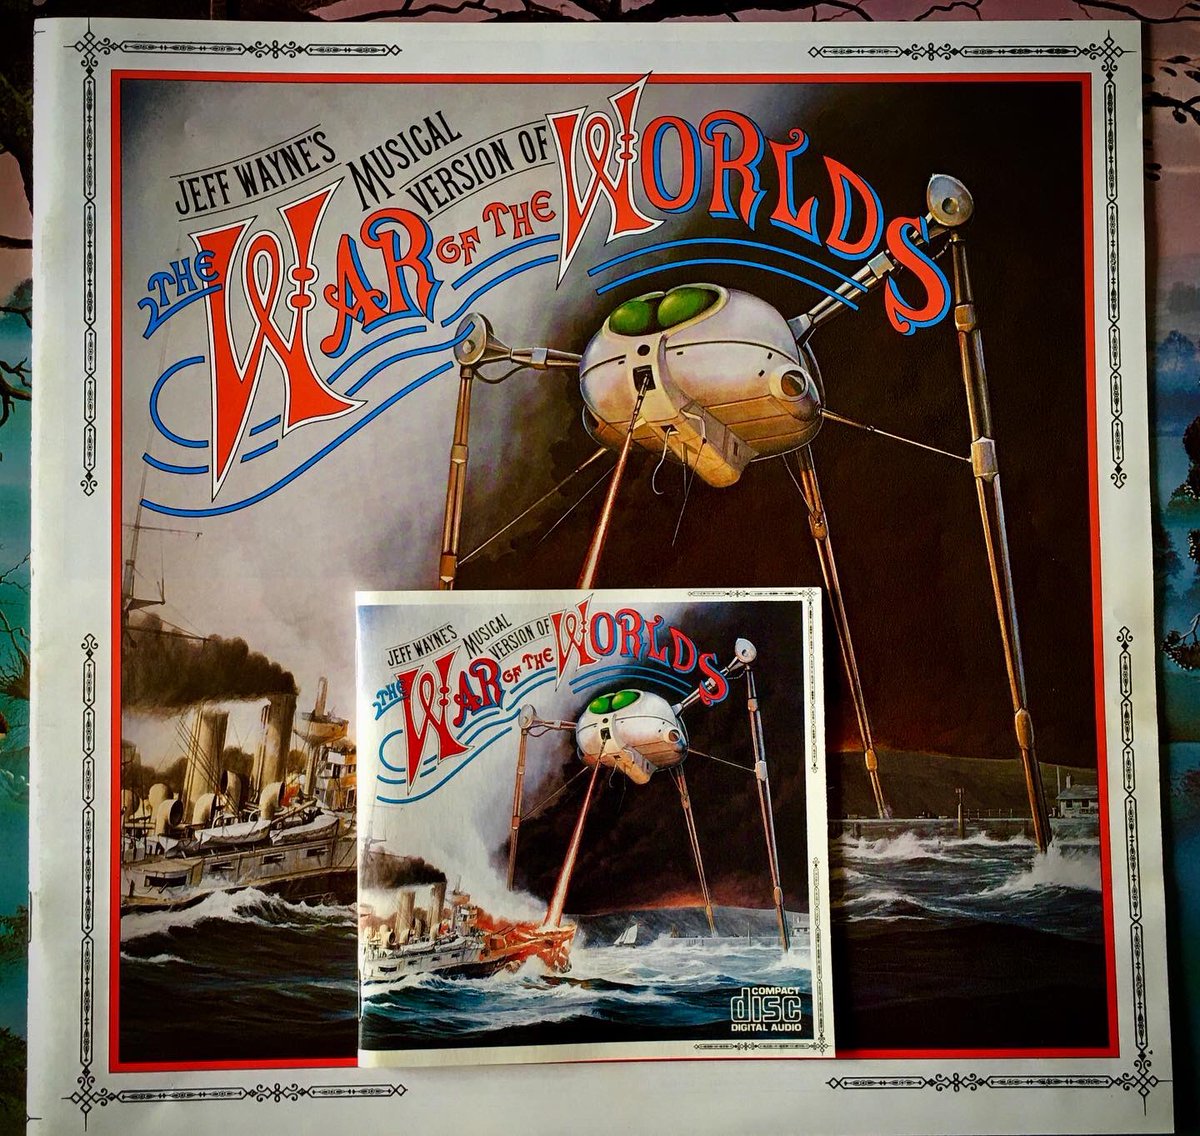 There has been two versions of Jeff Wayne’s Musical Version of War of the Worlds. The first one is #TopOfMyPops but which one is yours?

#waroftheworlds #jeffwayne #richardburton #phillynott #juliecorvington #justinhayward #davidessex